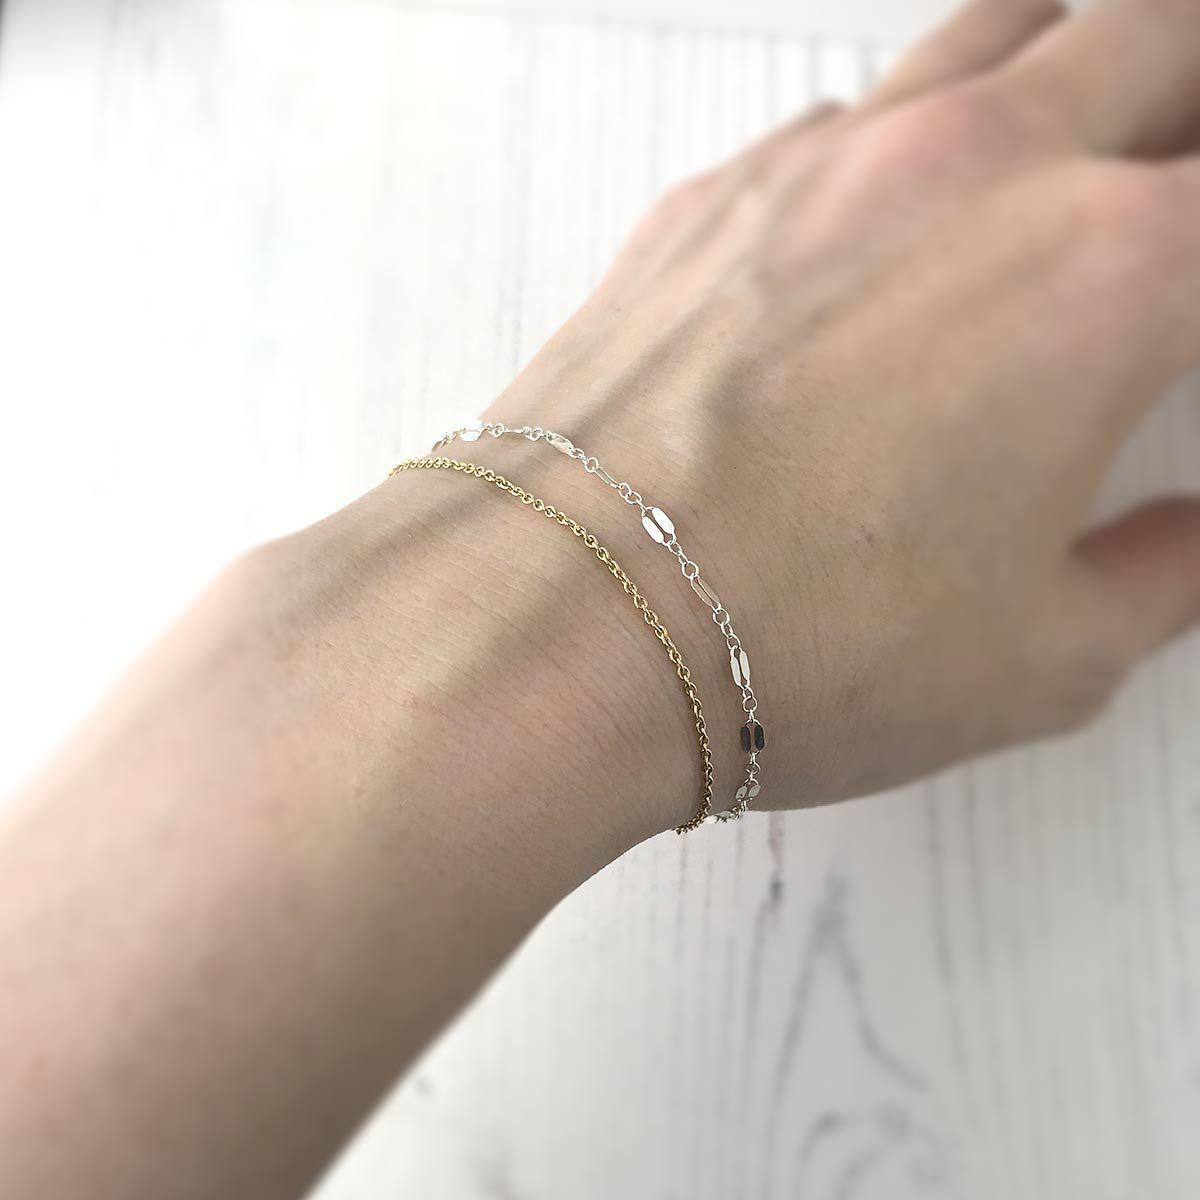 Lacey Bracelet - Silver, Gold - Handmade Jewelry by Burnish